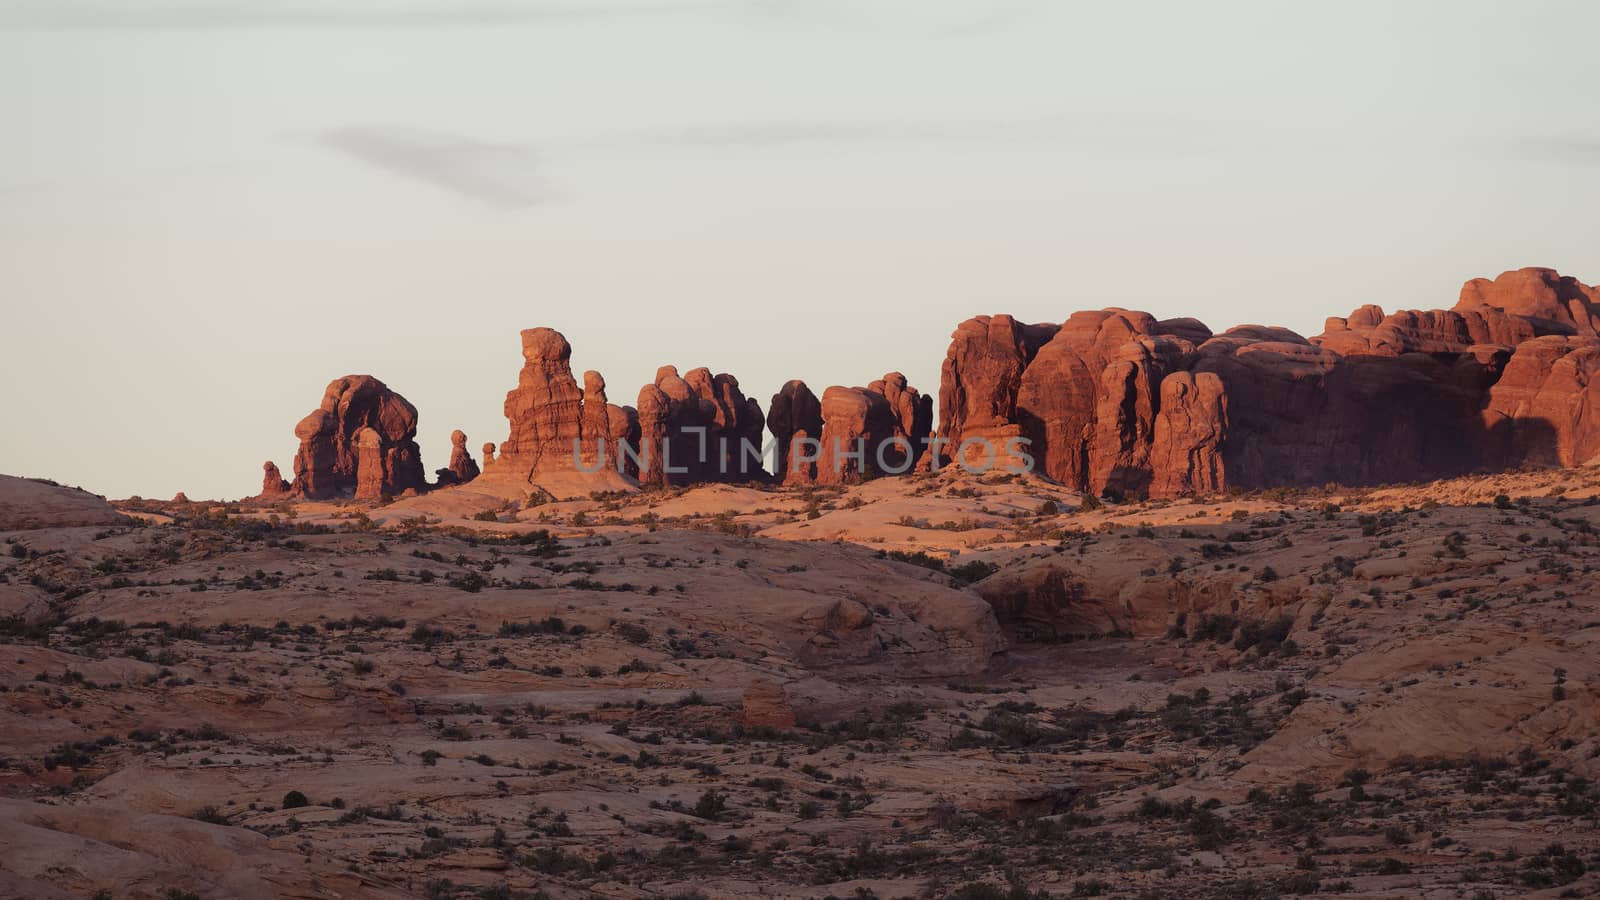 Warm sunset light on ancient sand stone spires, Arches National Park, Utah.